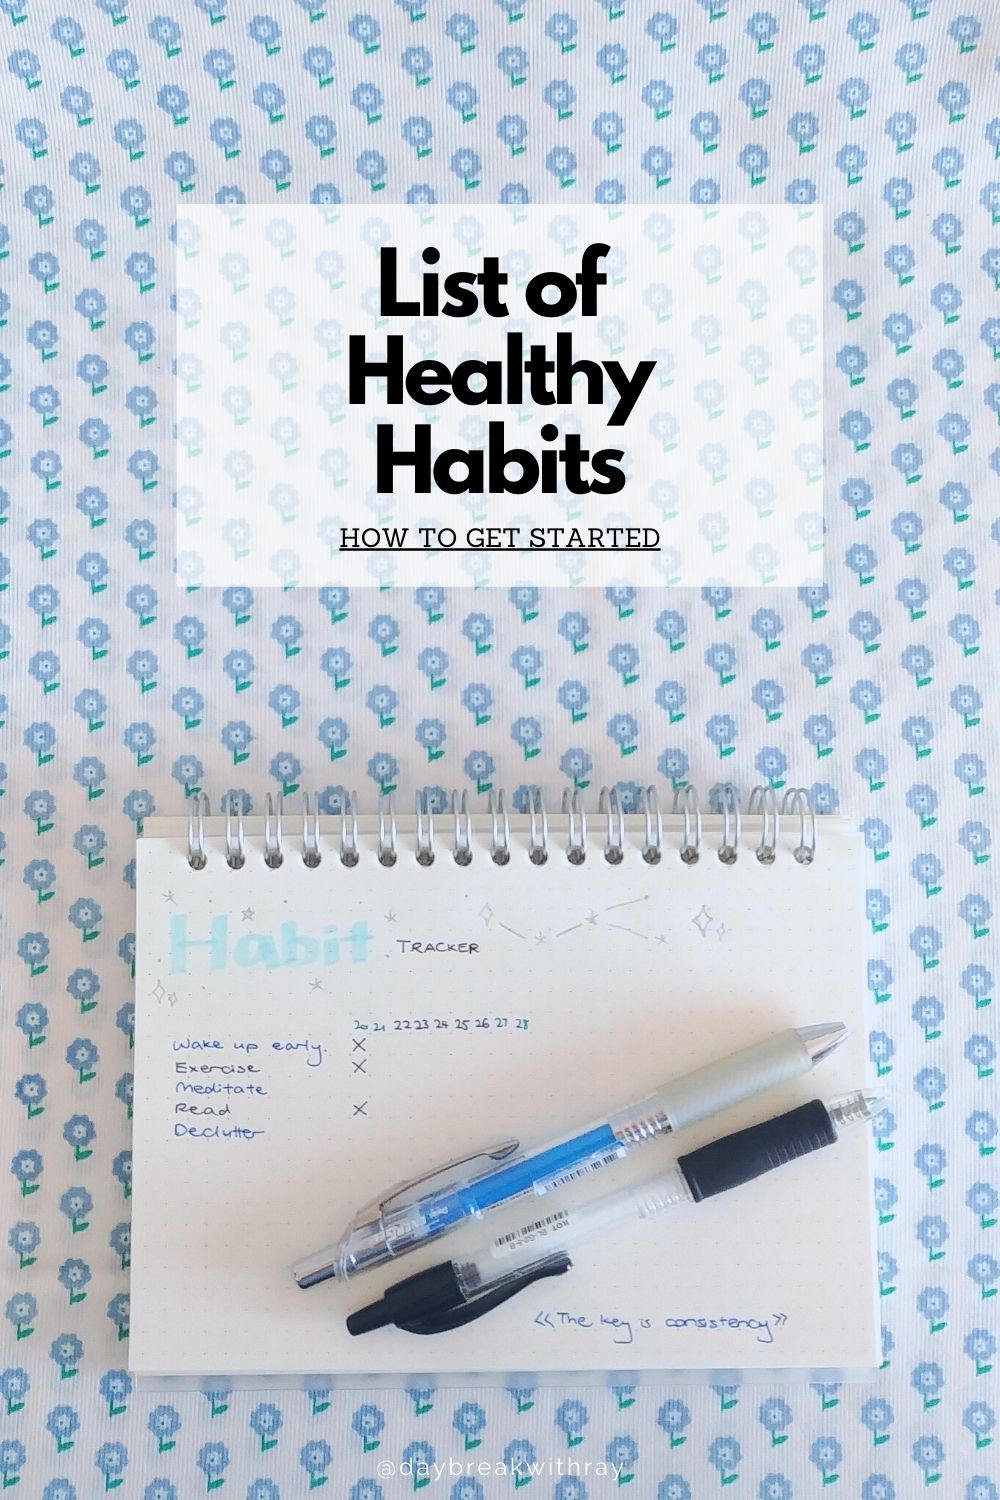 List of Healthy Habits and How To Get Started